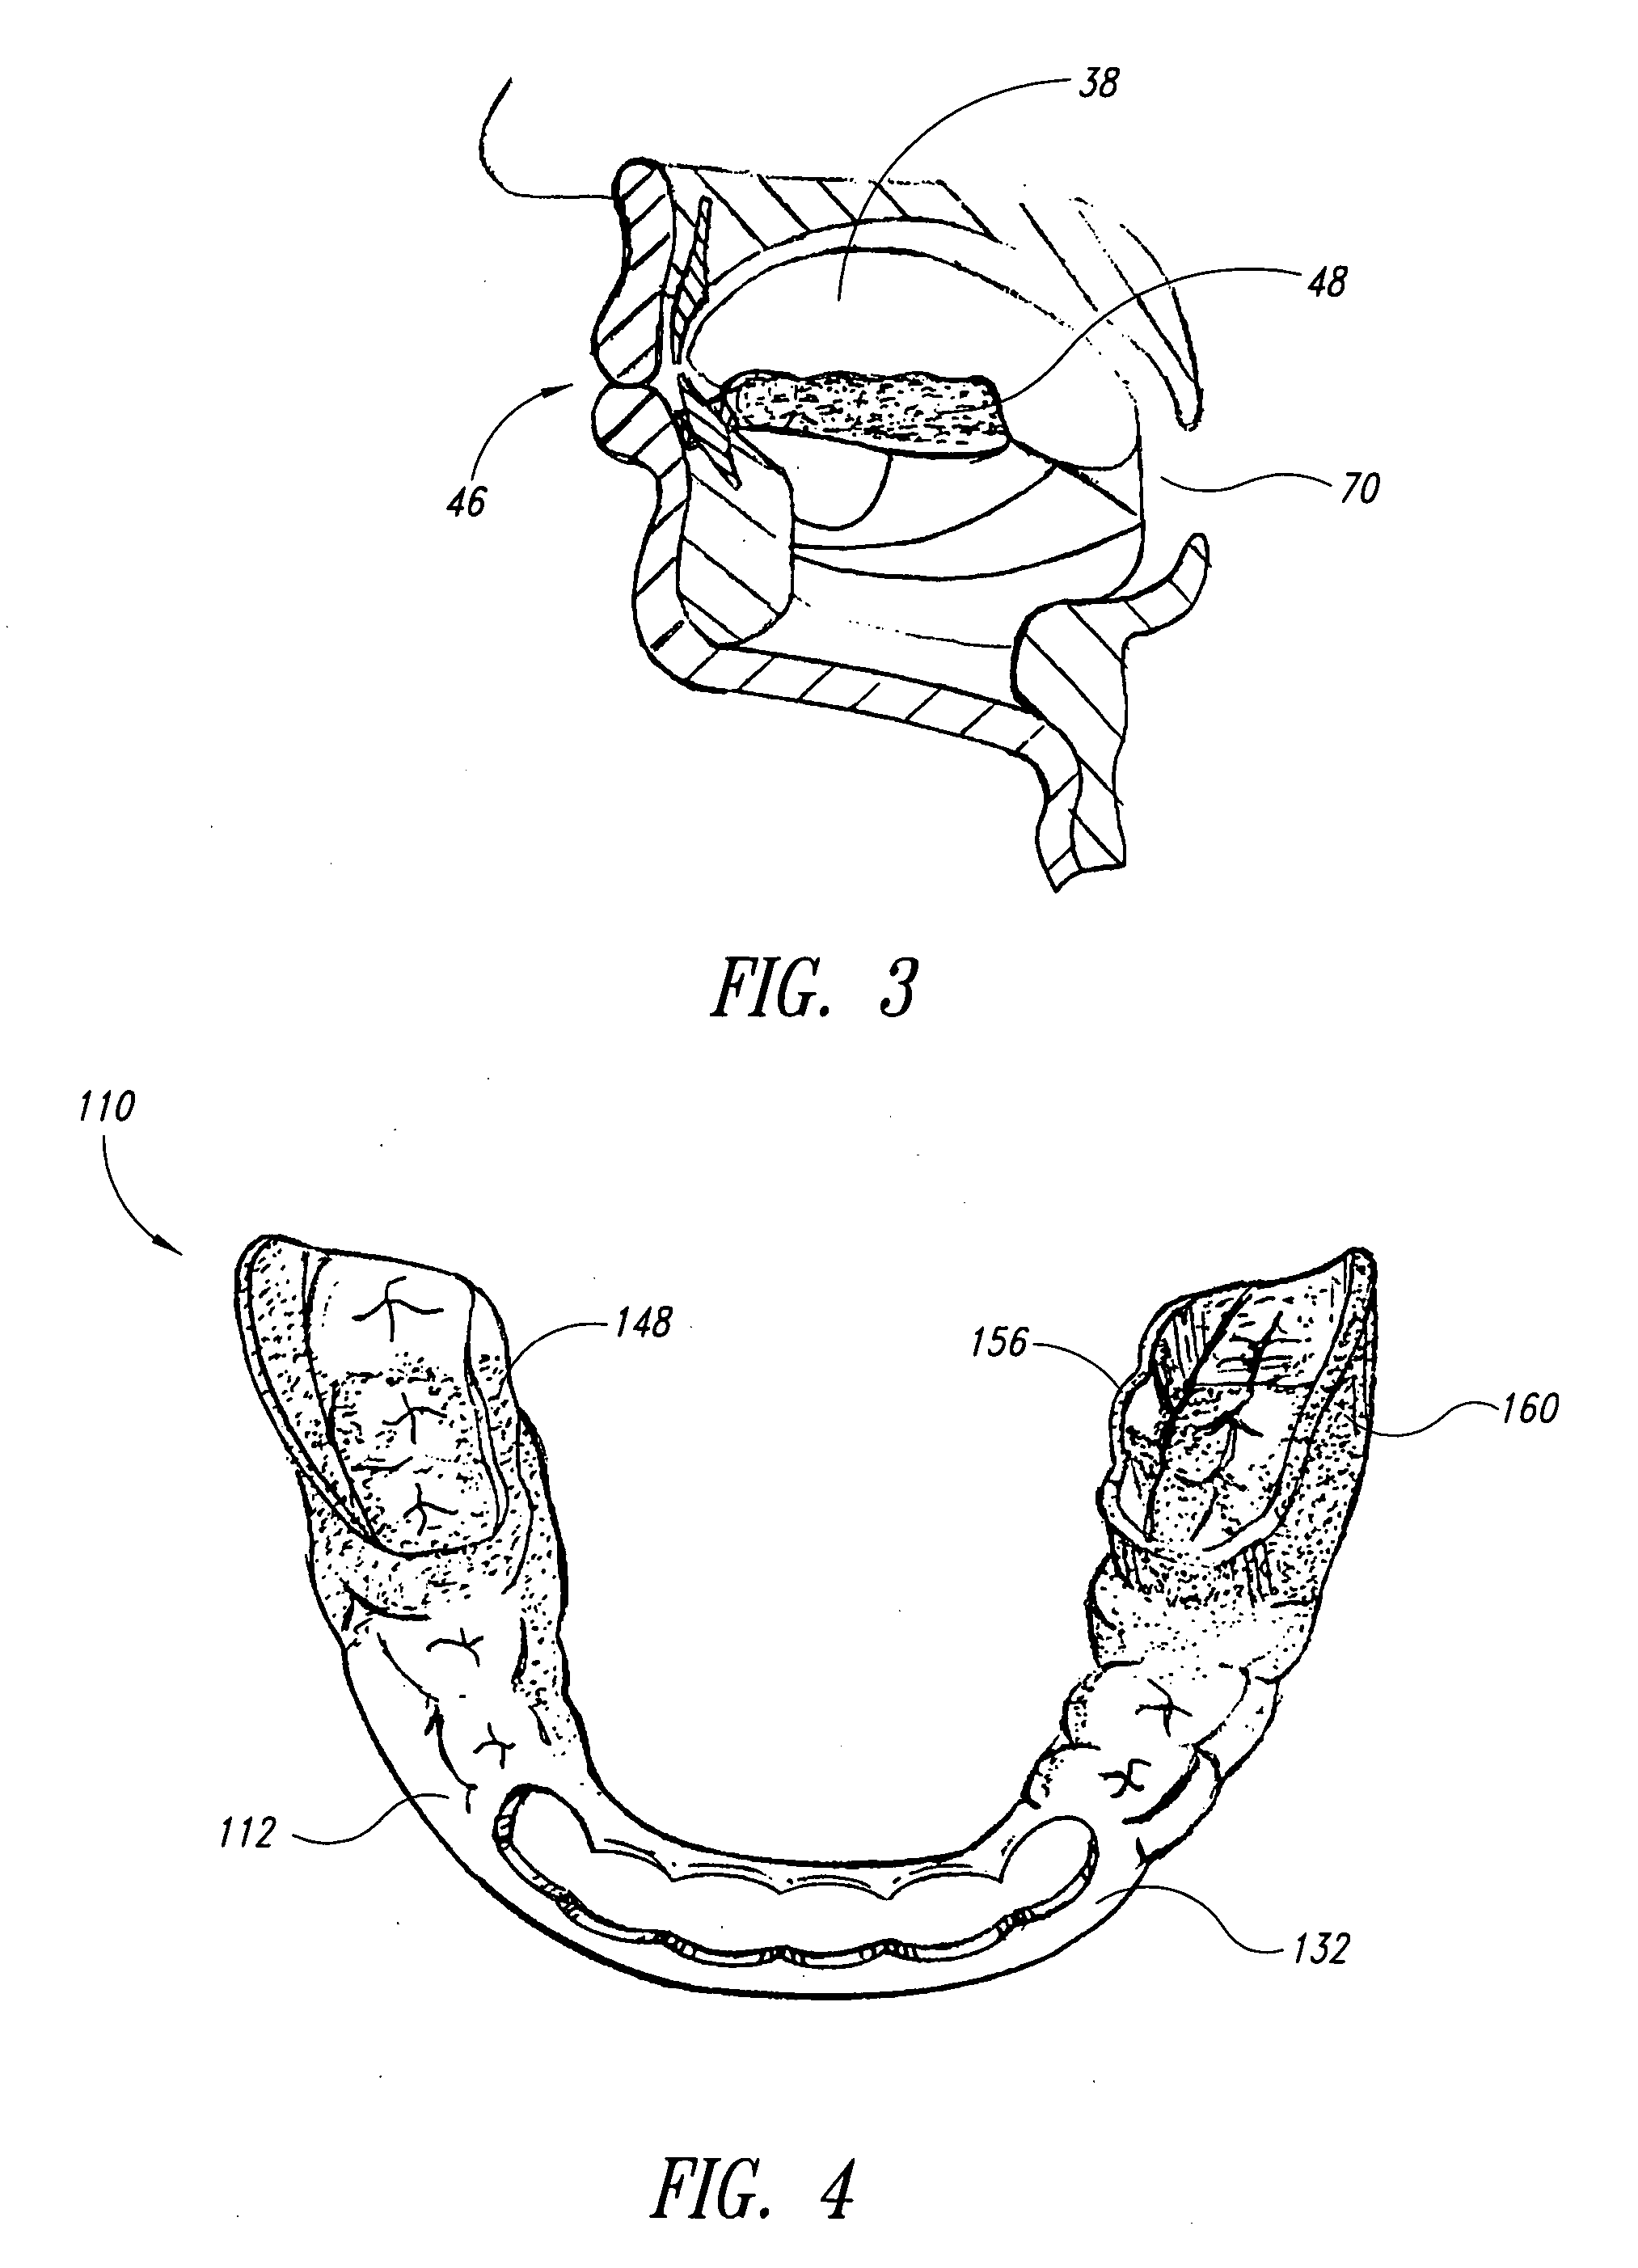 Dental orthotic devices and methods for management of impaired oral functions and resultant indications